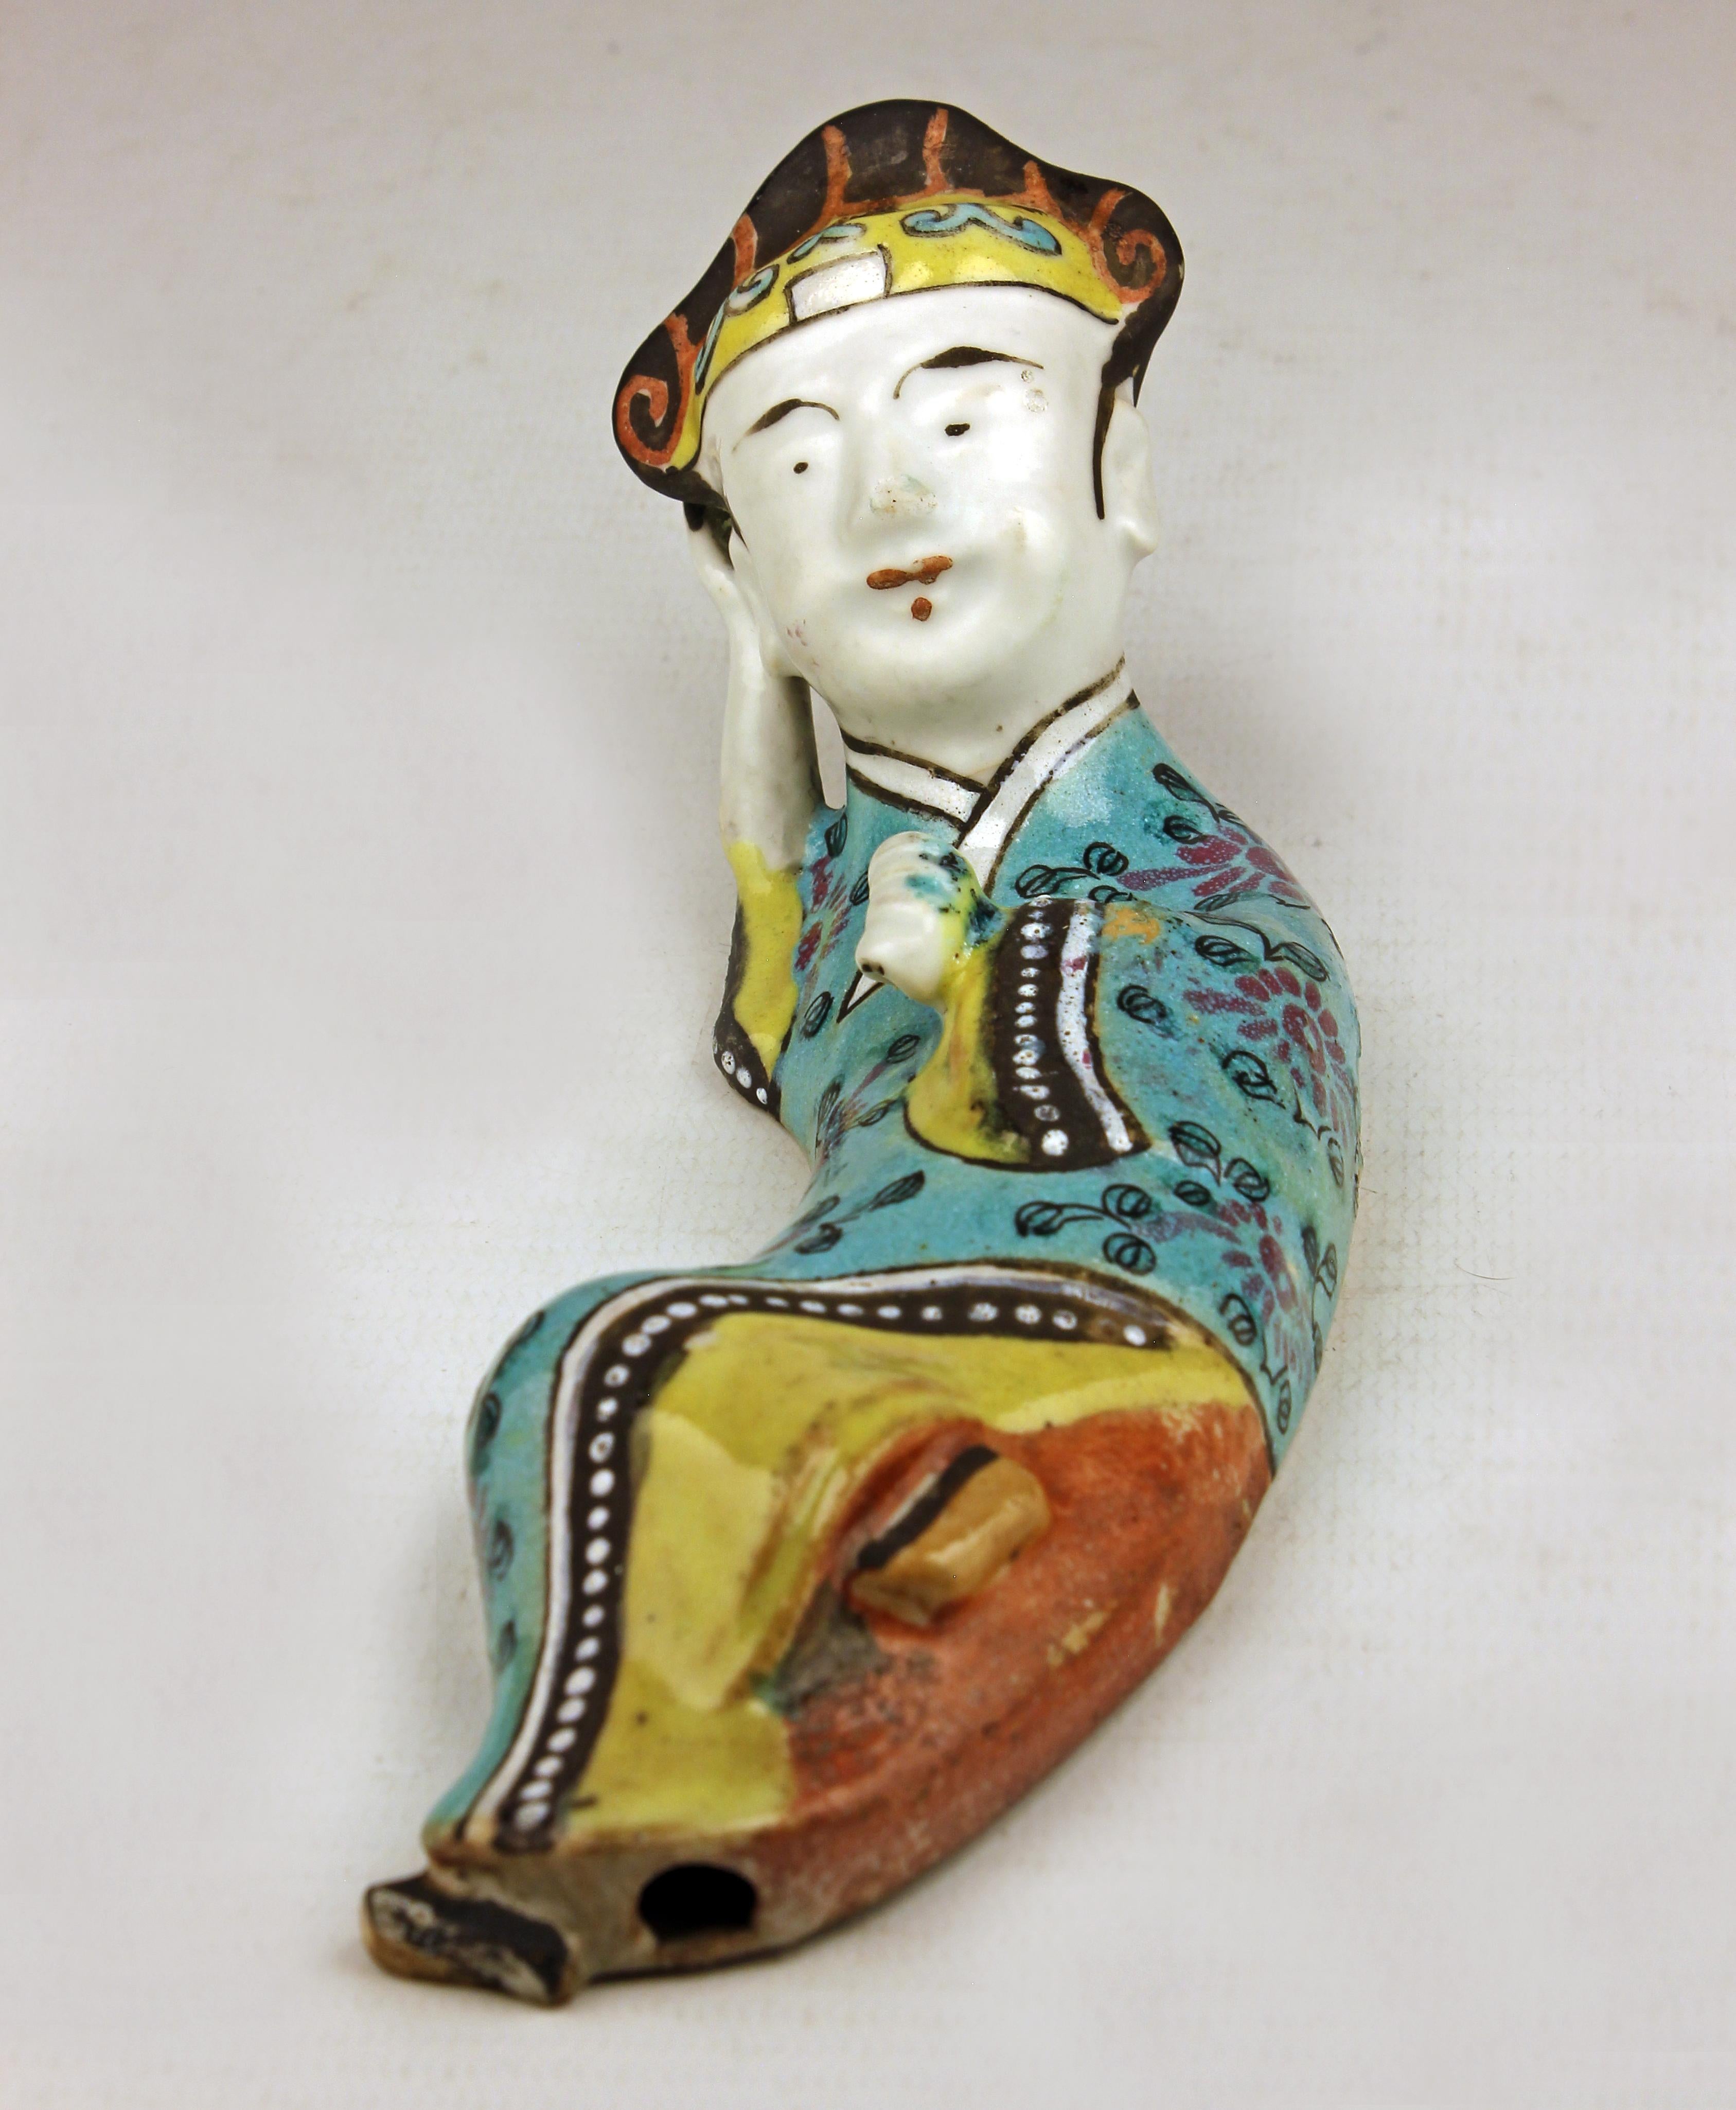 Pair of Mid-19th Century/Qing Dinasty of Enameled Chinese Porcelain Figurines For Sale 5